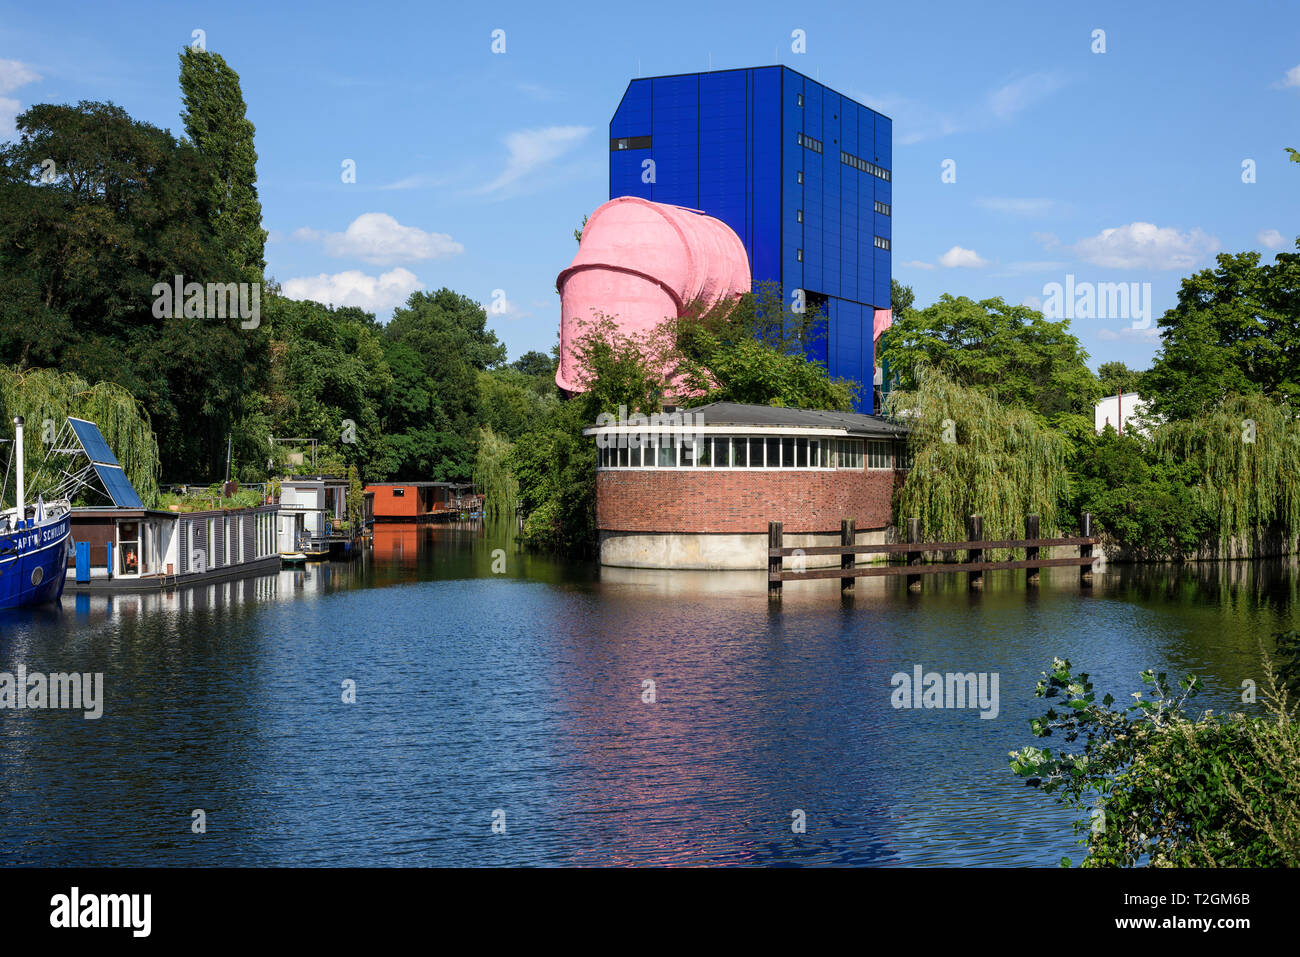 Berlin. Germany. Umlauftank 2, designed by architect Ludwig Leo (1924-2012) in 1975.   The Umlauftank 2 is a research complex which was built by the R Stock Photo